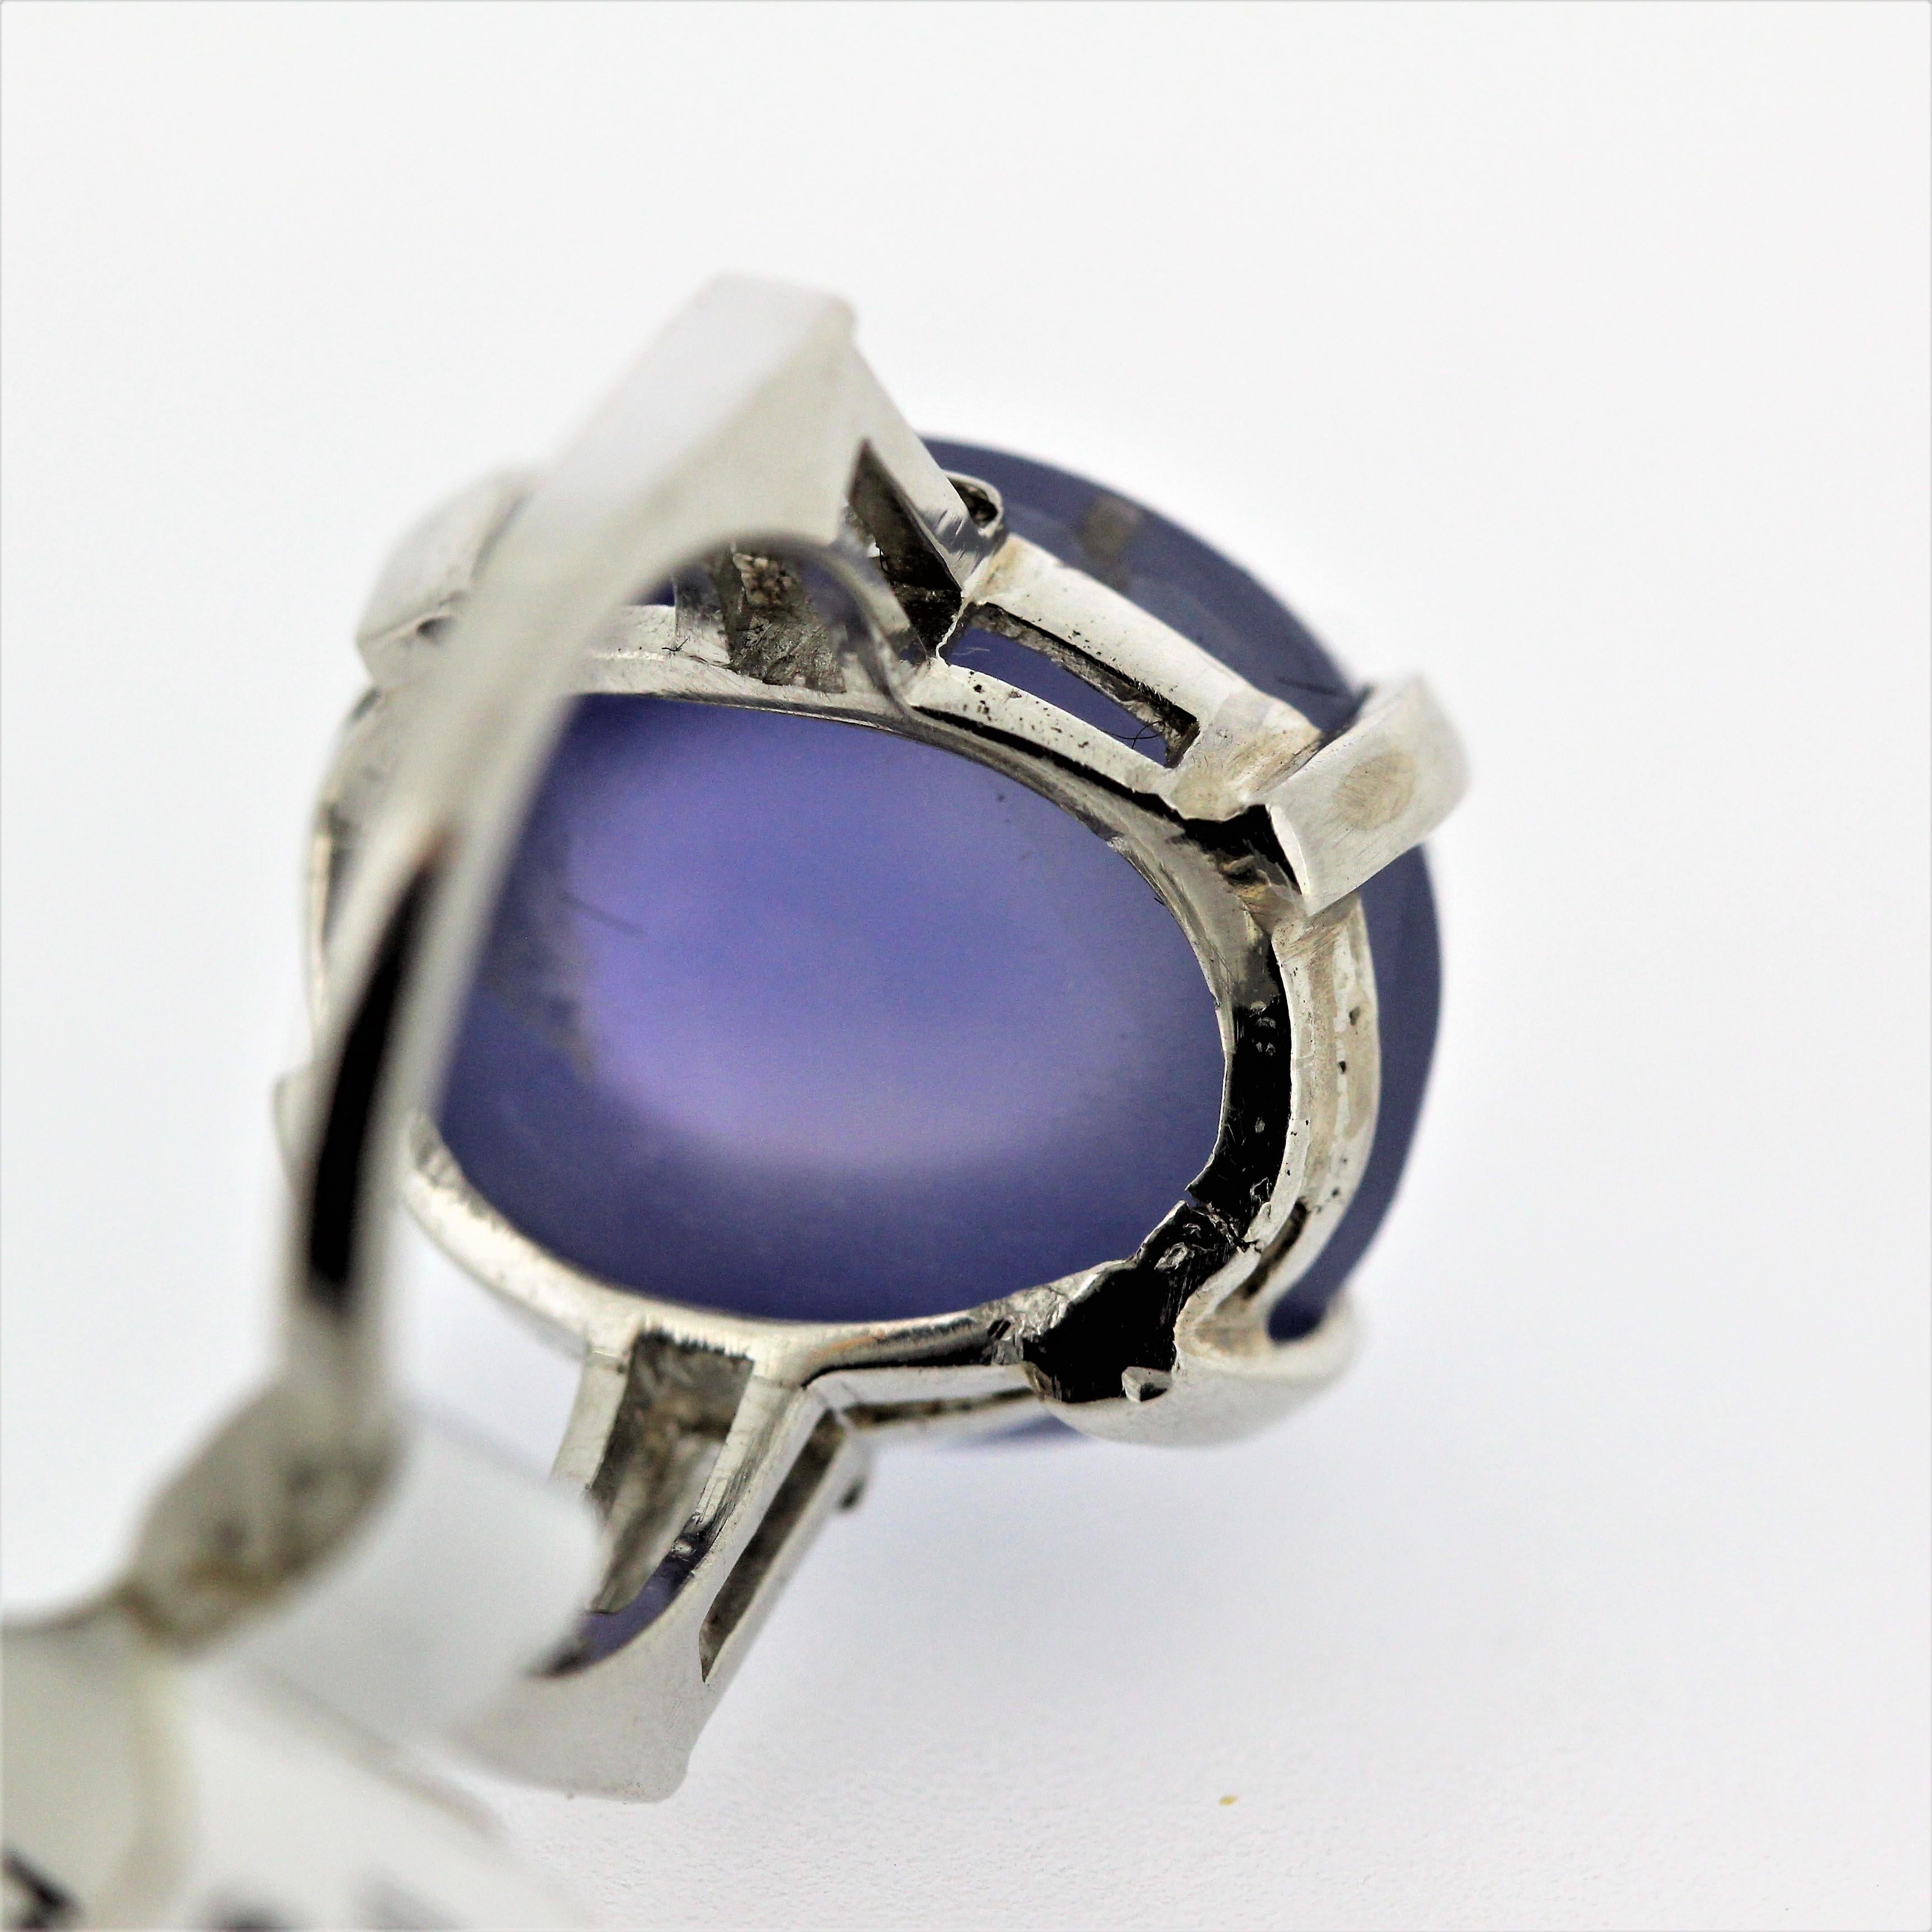 28 Carat Vintage Blue Star Sapphire and Diamond 3-Stone Ring, circa 1945-1955 For Sale 2